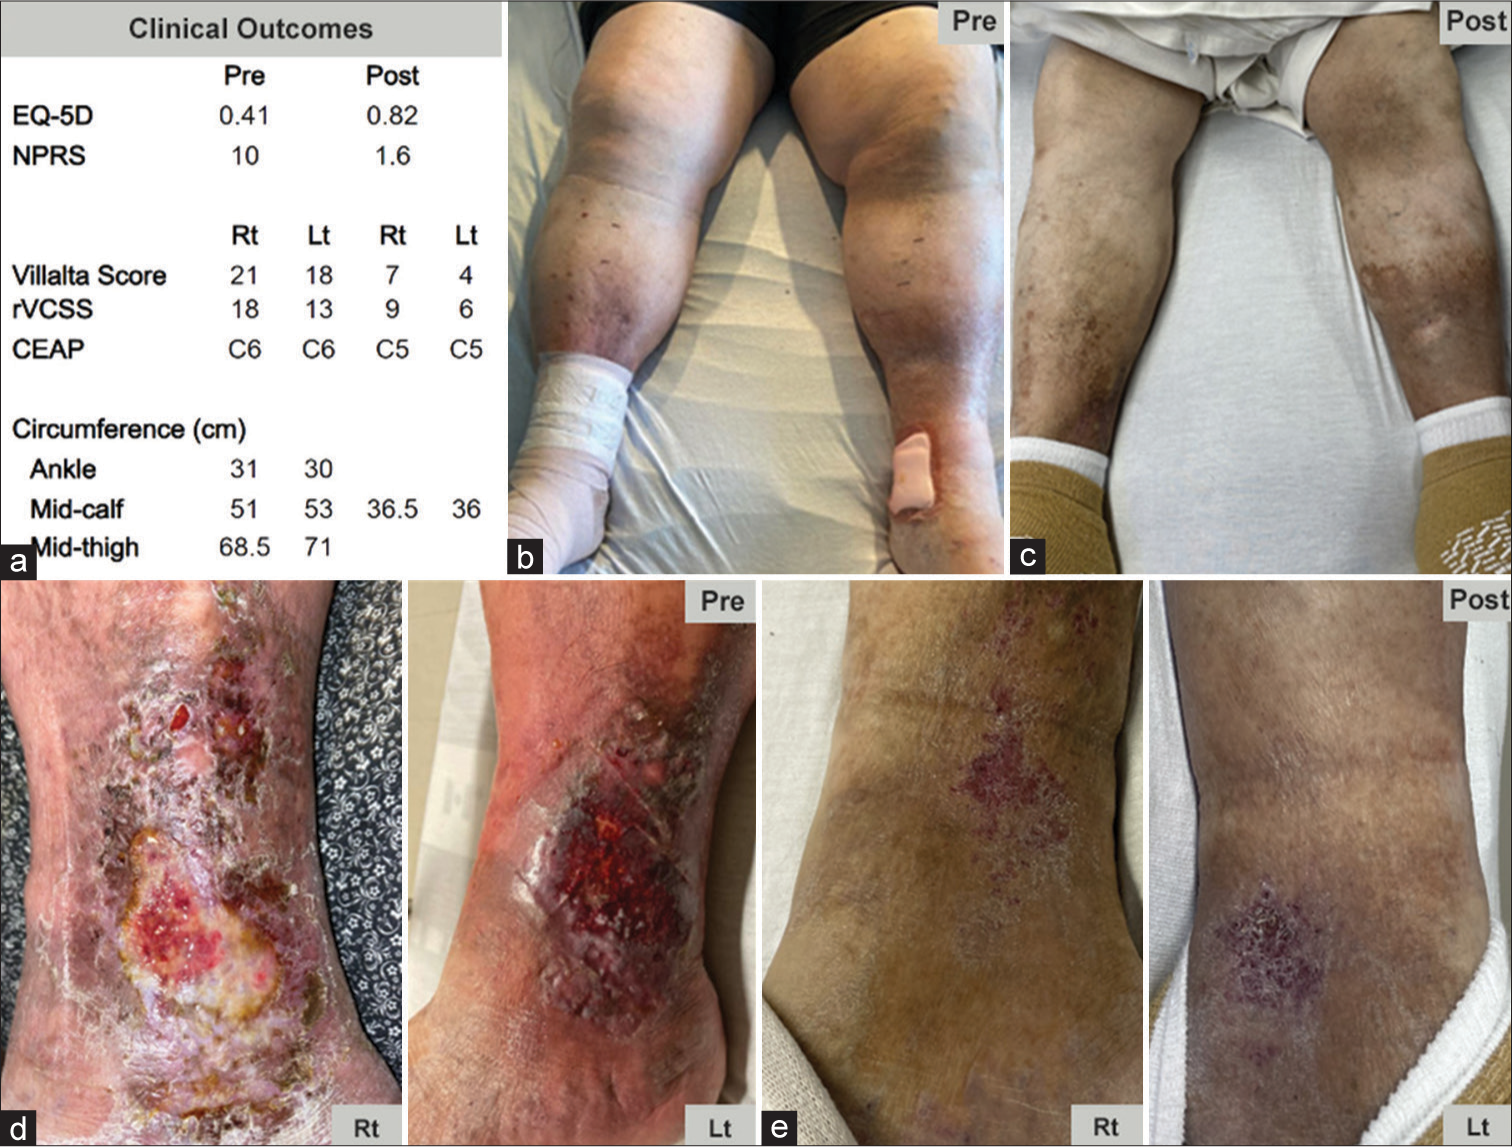 A 60-year-old male with a 25-year history of recurrent venous thromboembolism and 9-year history of recurrent inferior vena cava and left common femoral vein in-stent thrombosis presented with worsening lower extremity swelling and bilateral non-healing ulcers. The patient was treated with the RevCore mechanical in-stent thrombectomy device. (a) Significant clinical improvements were seen at 4- and 8-week post-procedure. (b and c) Significant preprocedural swelling in the feet and calves is resolved by 8-week post-procedure. (d and e) Healing of multiple ulcers was observed 8-week post-procedures. (EQ-5D: EuroQoL 5 dimension, NPRS: numeric pain rating scale, rVCSS: revised venous clinical severity score, CEAP: Clinical etiology anatomy pathophysiology, Rt: right, Lt: left).